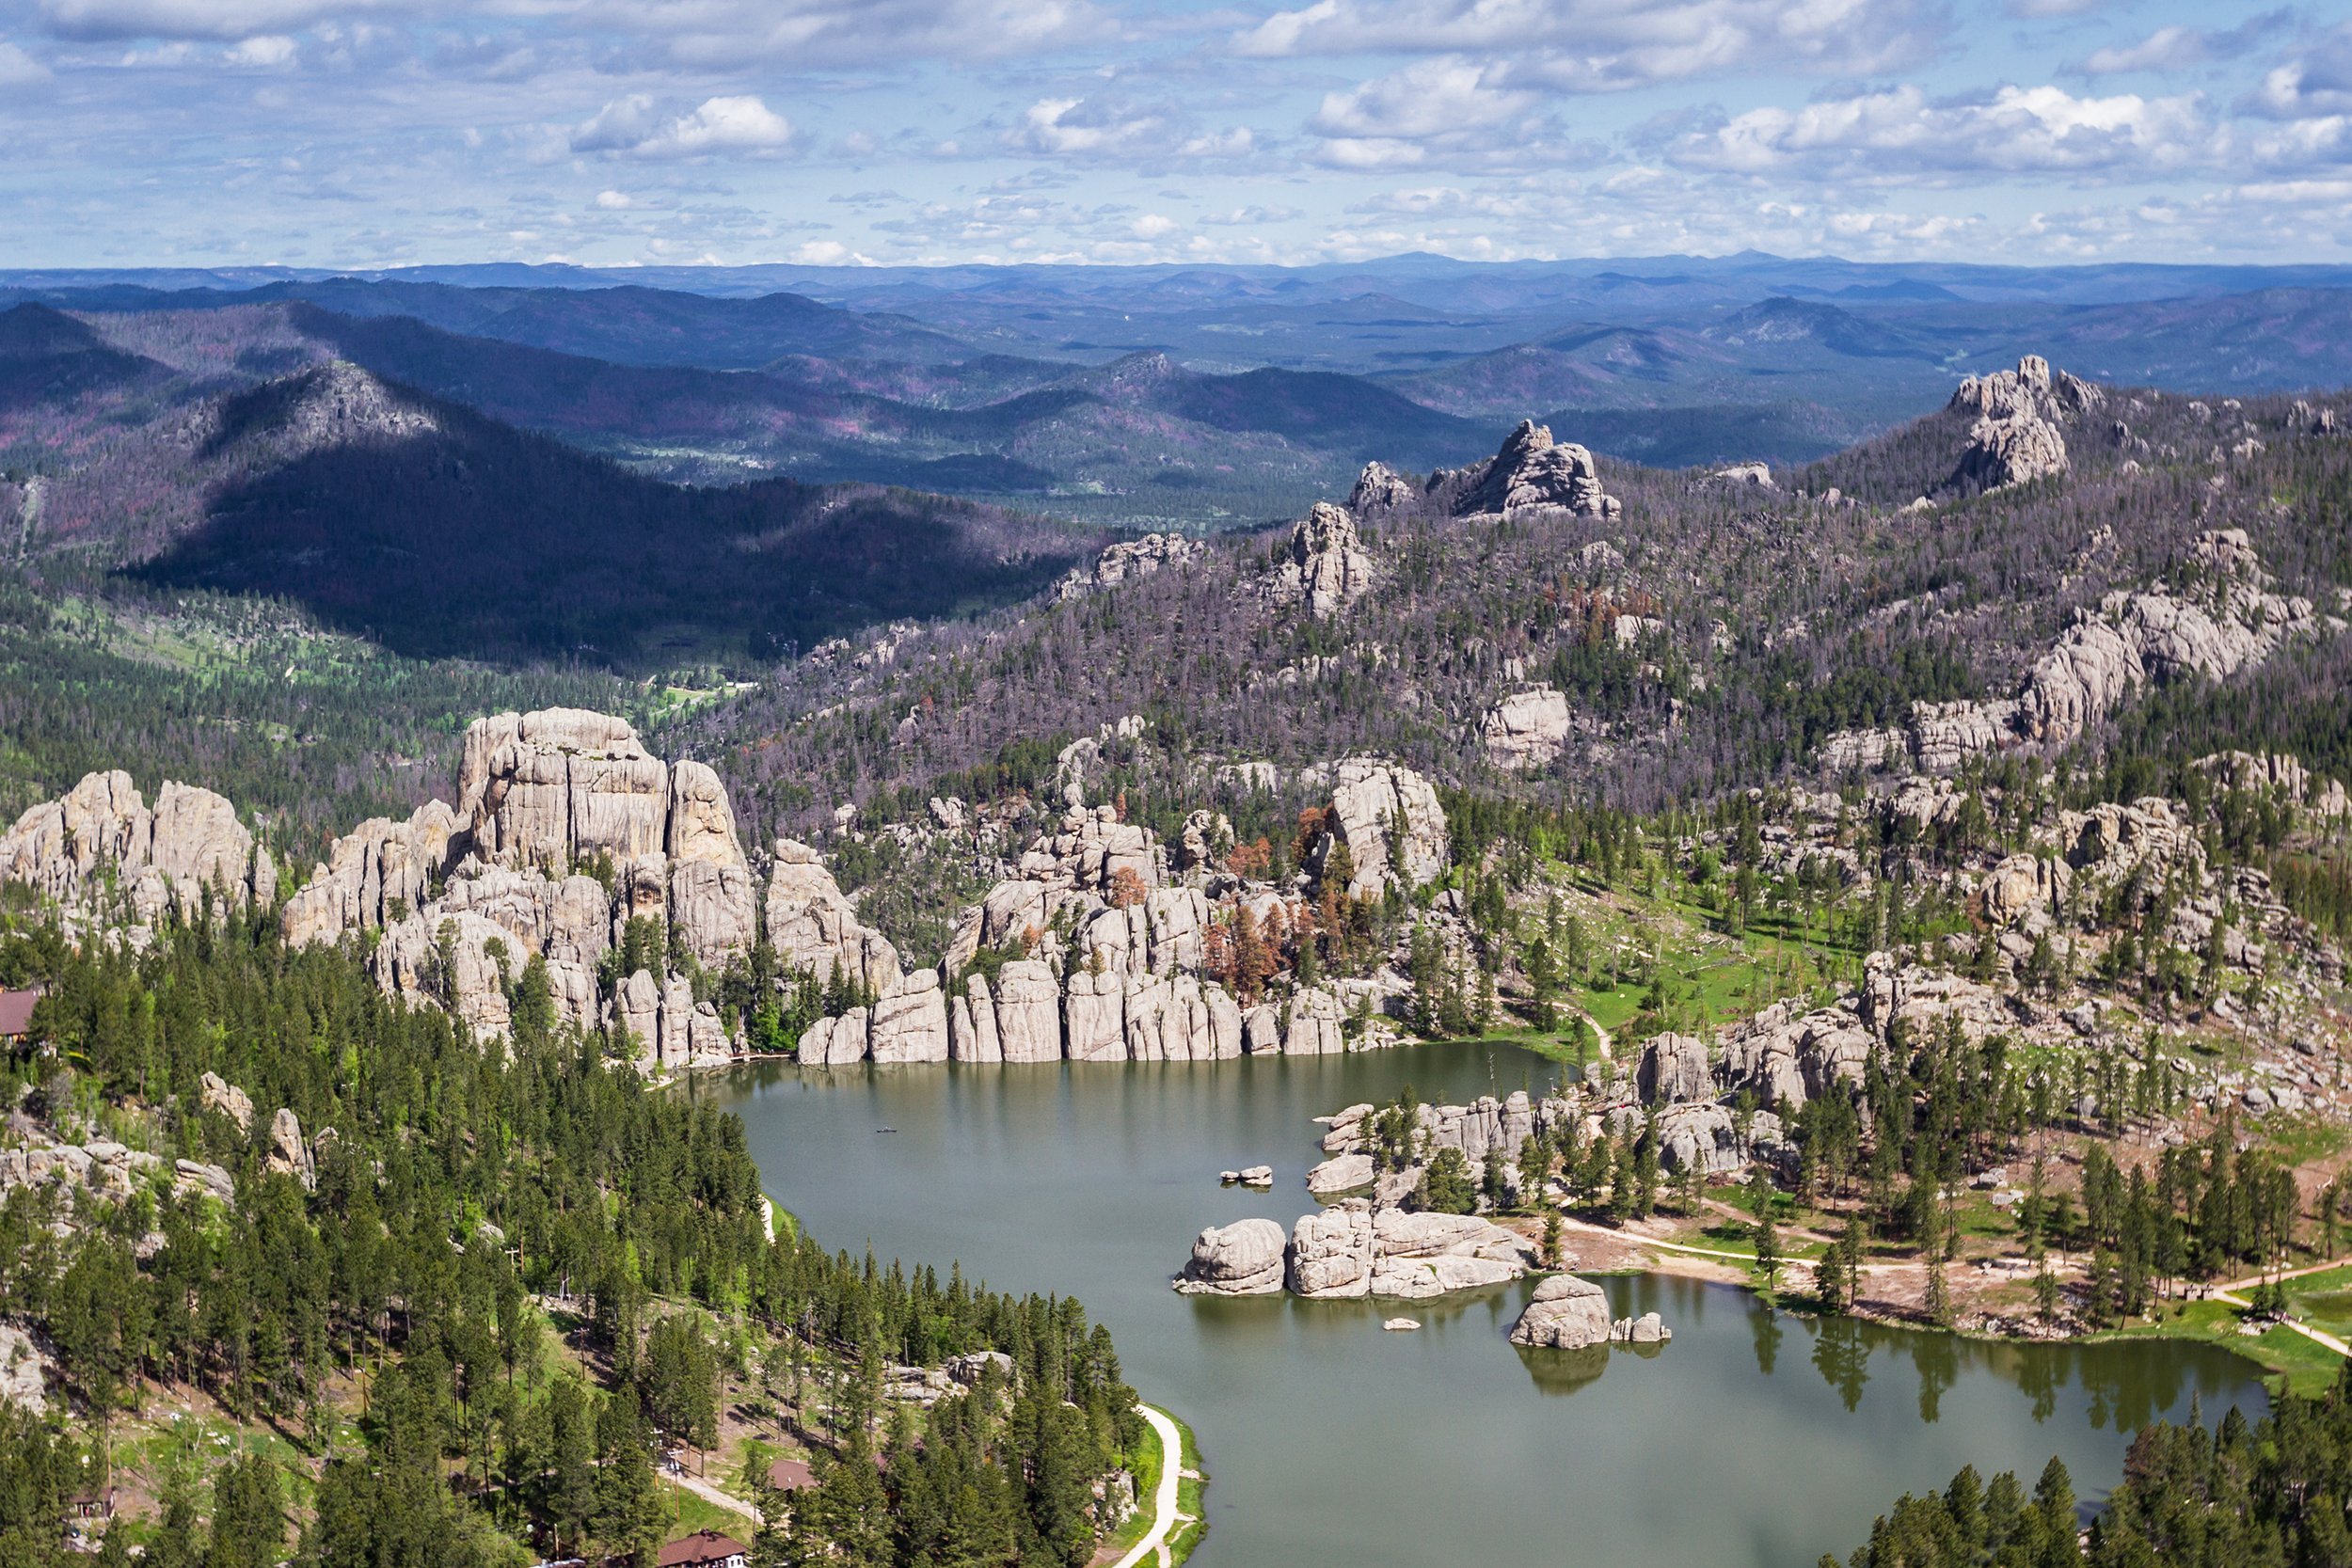 <p>One of the country's finest scenic byways is this 70-mile excursion through the iconic Black Hills of western South Dakota. Keep your eyes peeled for the plentiful wildlife popping up amid the region's jagged rock formations as you make your way through Custer State Park, the Black Elk National Wilderness Area, and Norbeck Wildlife Preserve. </p>